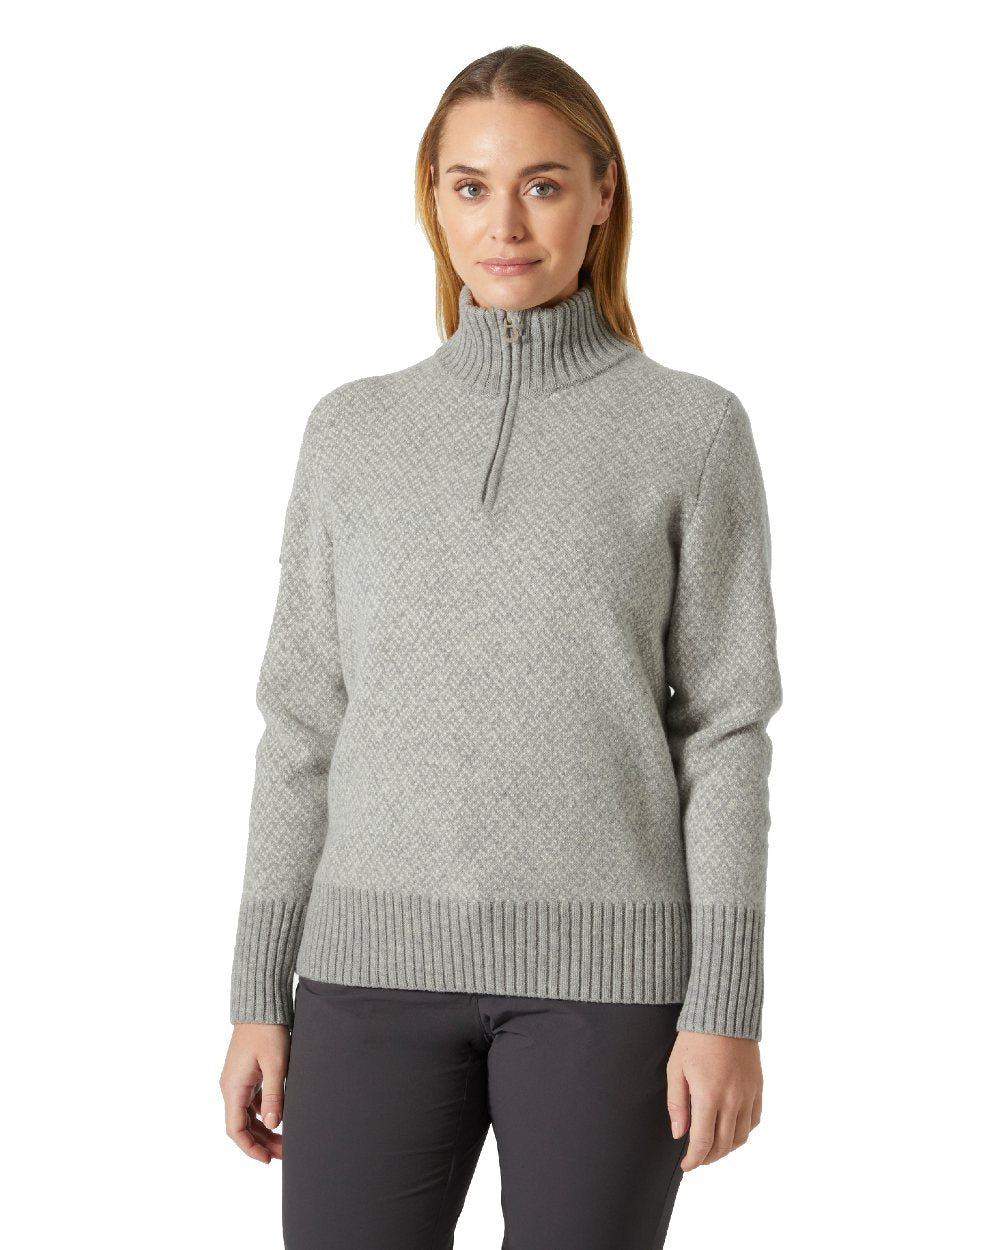 Terrazzo coloured Helly Hansen Womens Arctic Iceland Knit Sweater on white background 